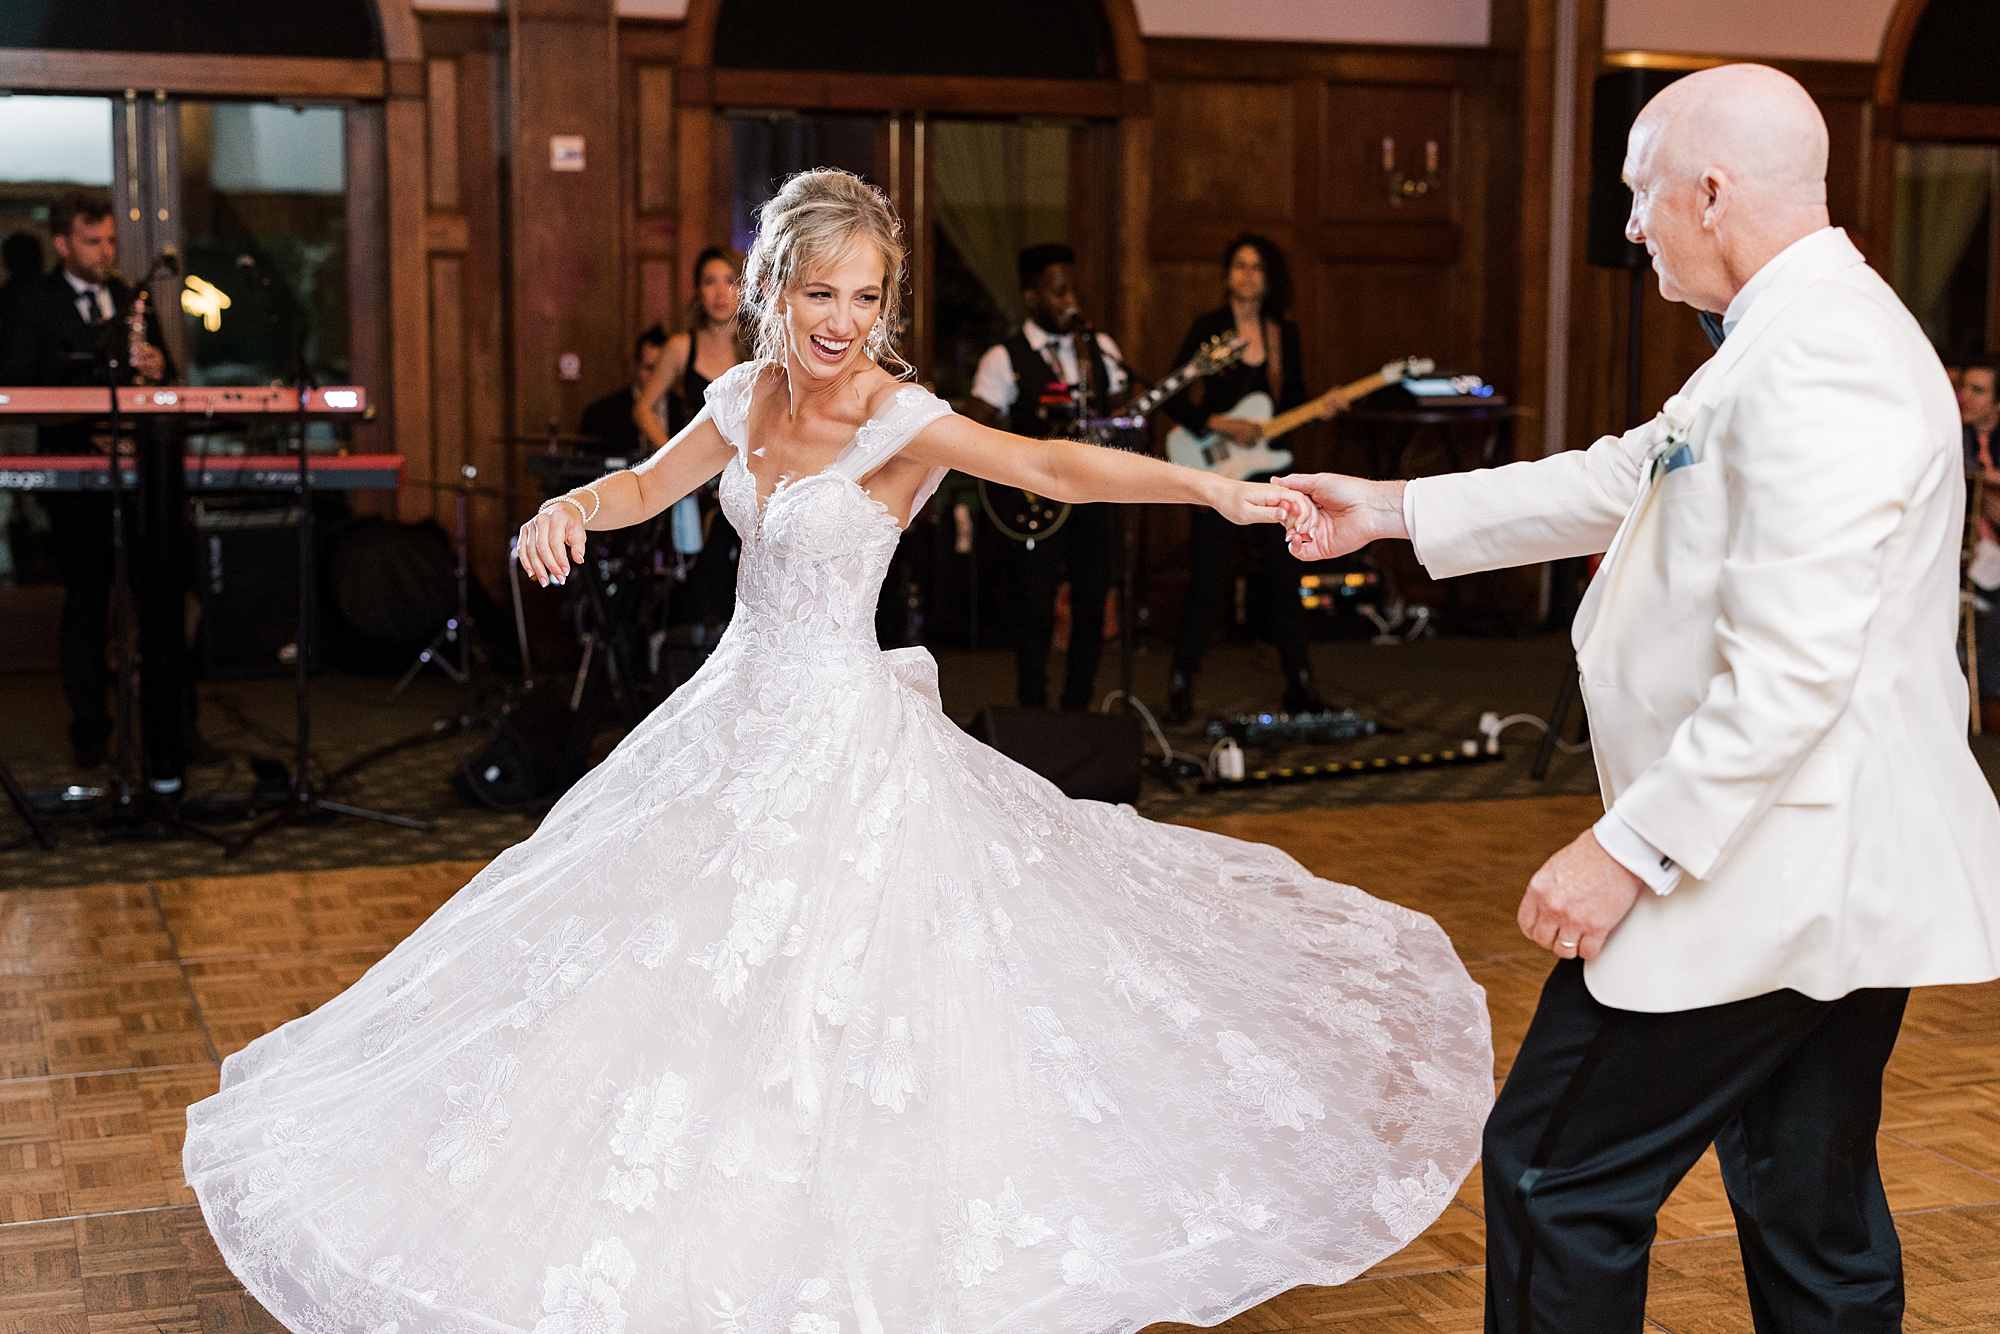 dad twirls bride out during dance at Skytop PA wedding reception